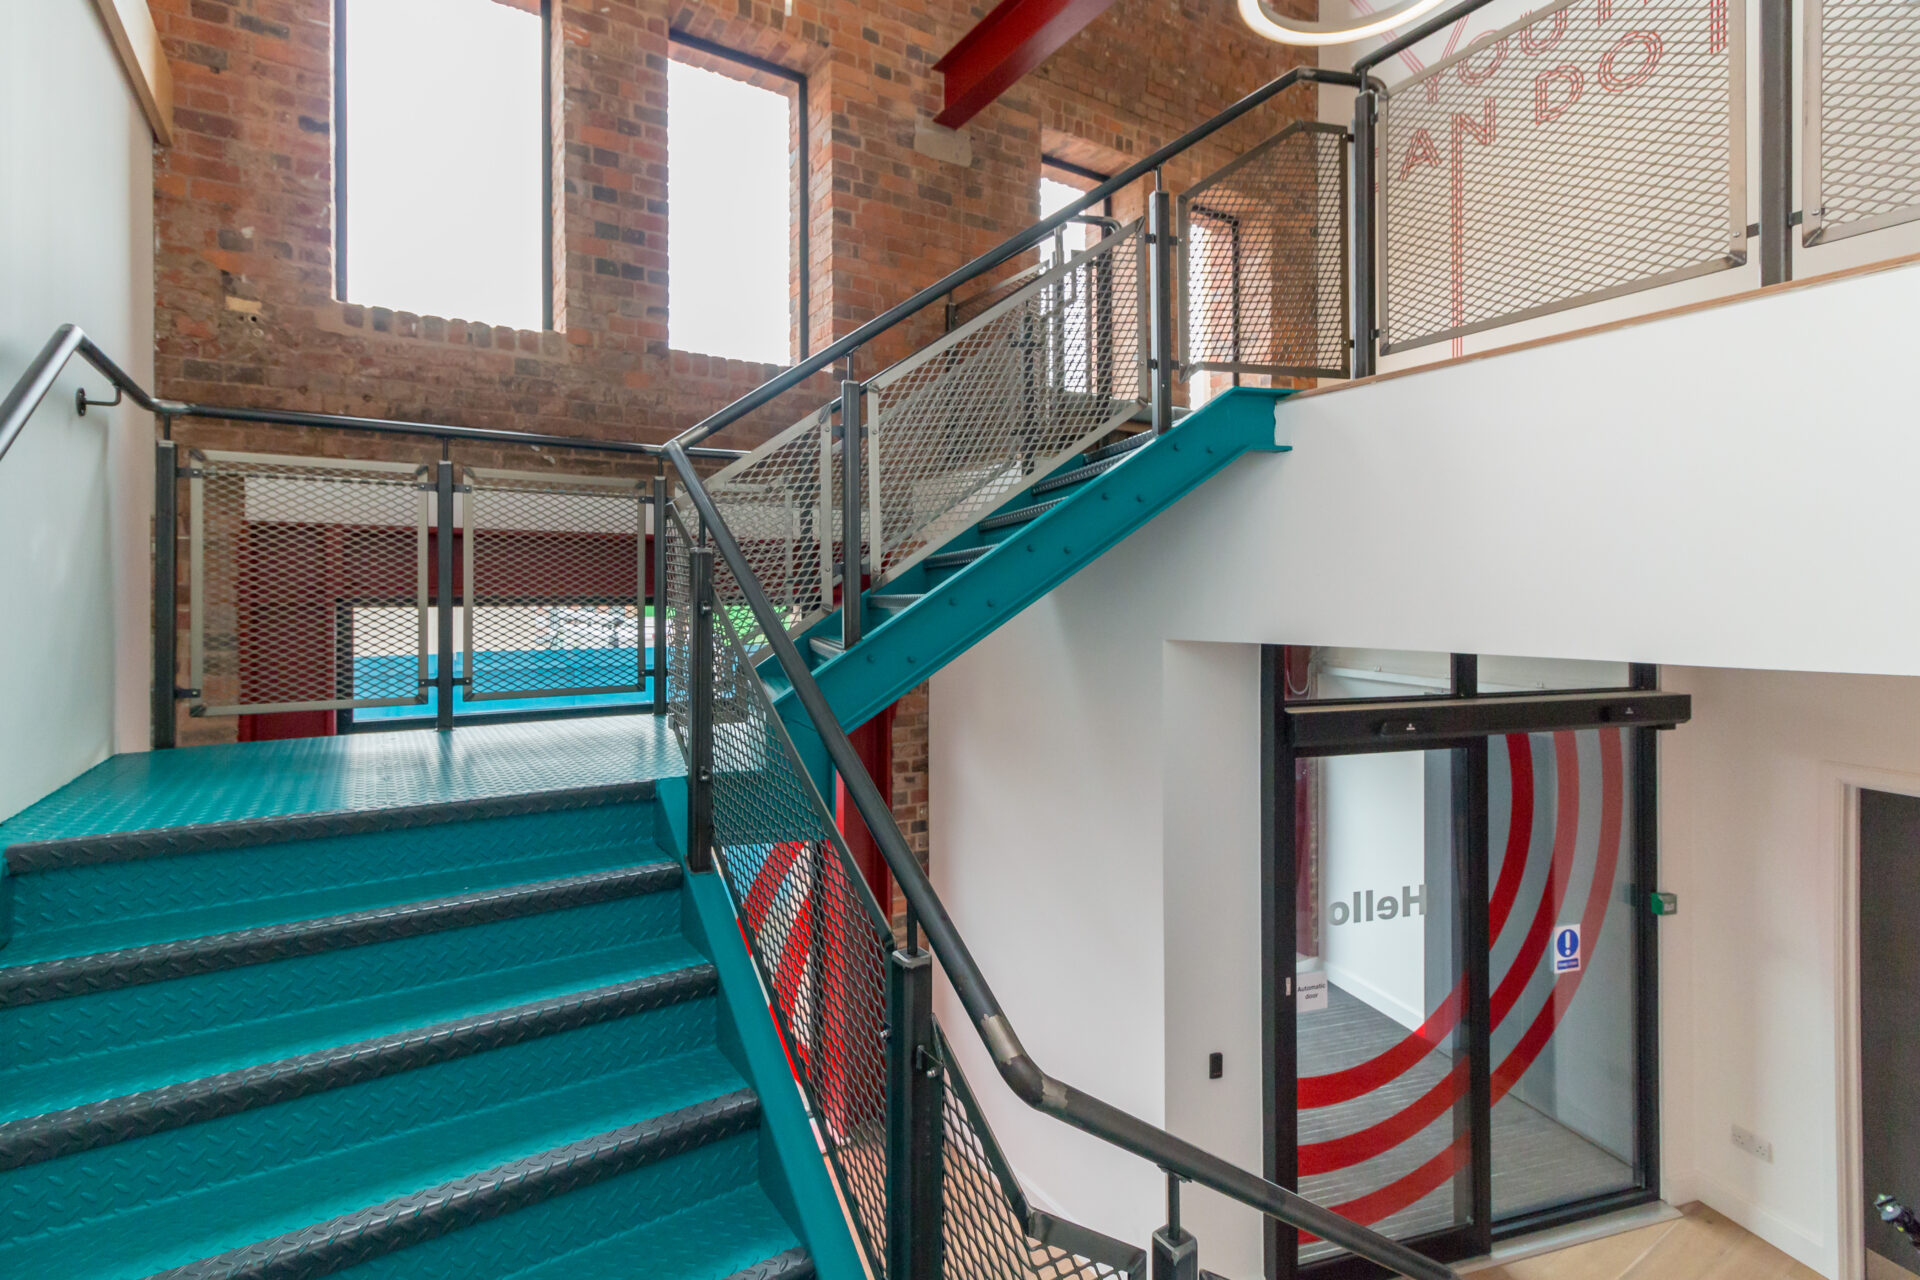 The interiors of the refurbished Prince’s Trust Birmingham, with newly installed bespoke steel staircases and glazed sliding doors.